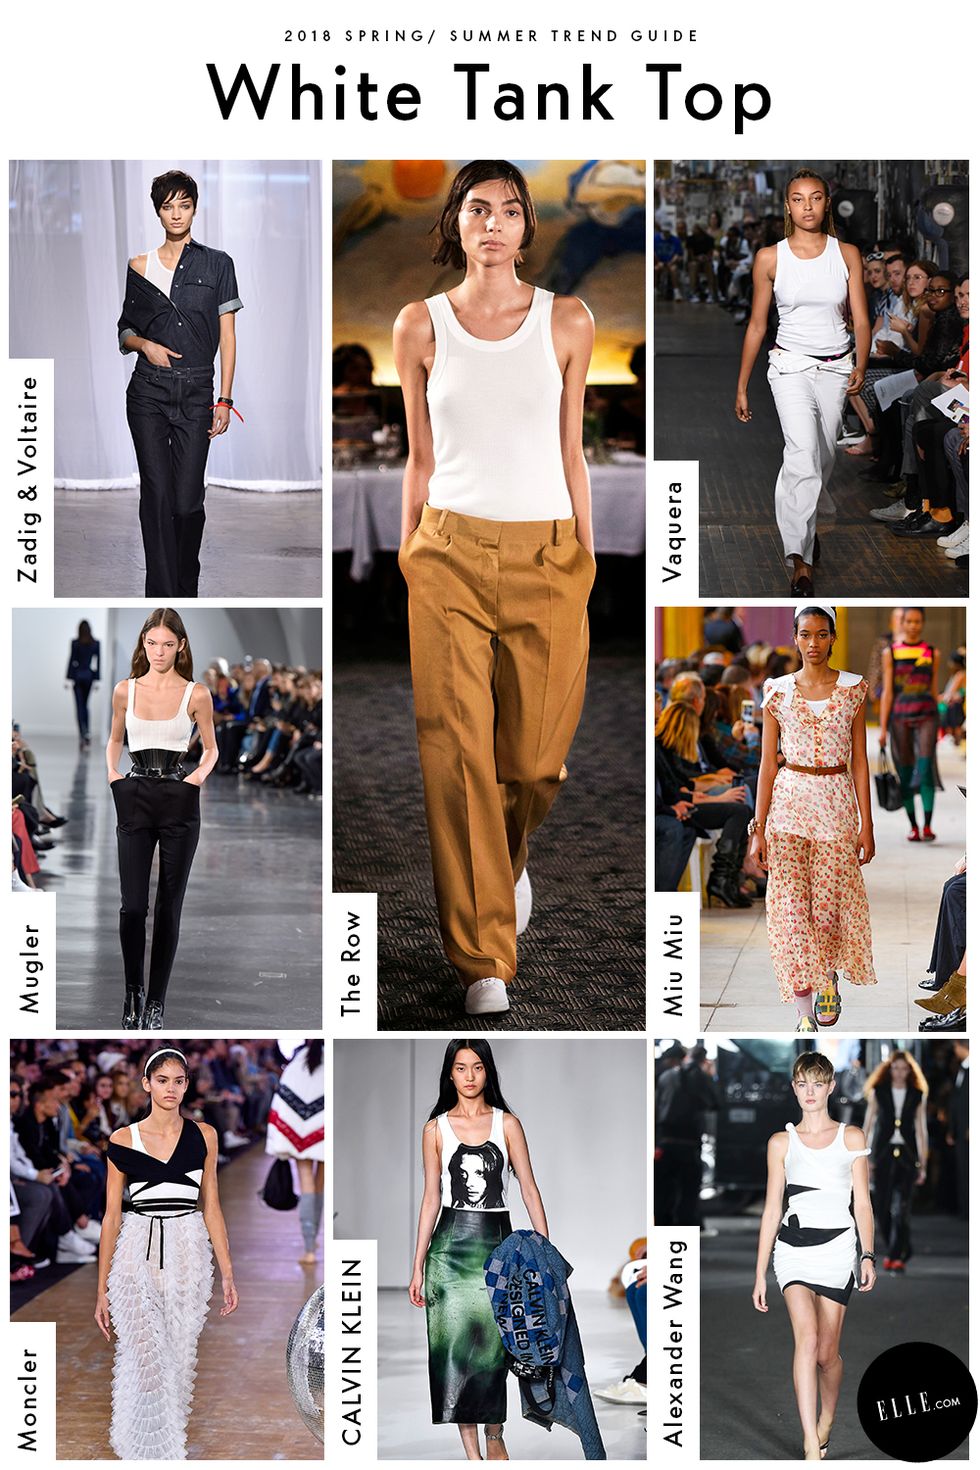 Top 20 trends for Spring/Summer 2015